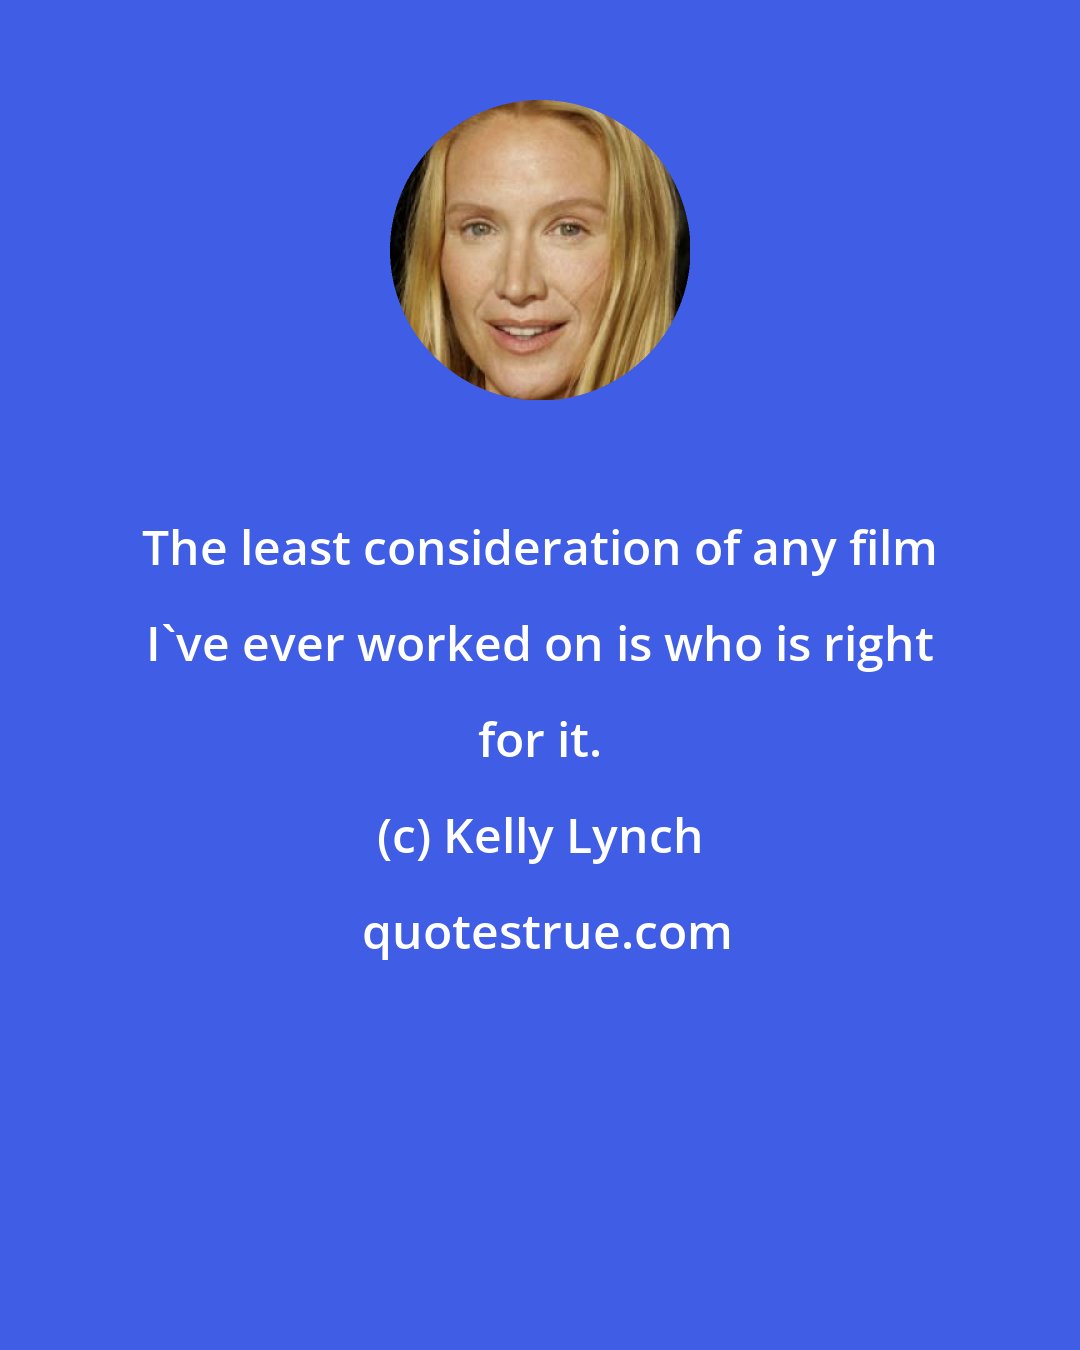 Kelly Lynch: The least consideration of any film I've ever worked on is who is right for it.